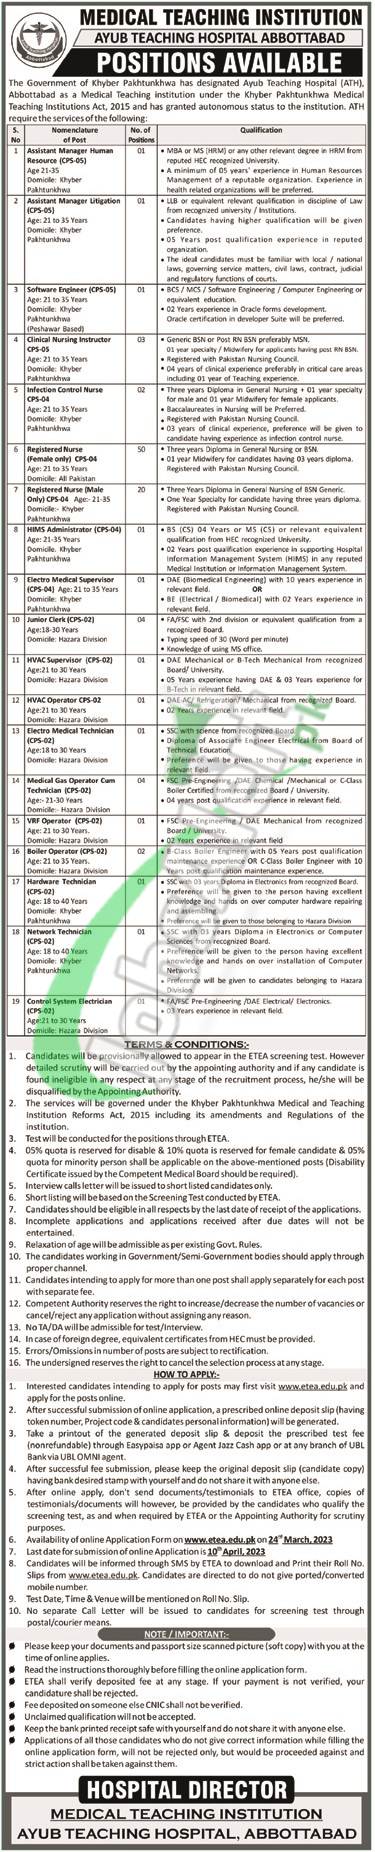 ATH Abbottabad Jobs 2023 Medical Teaching Institution Latest